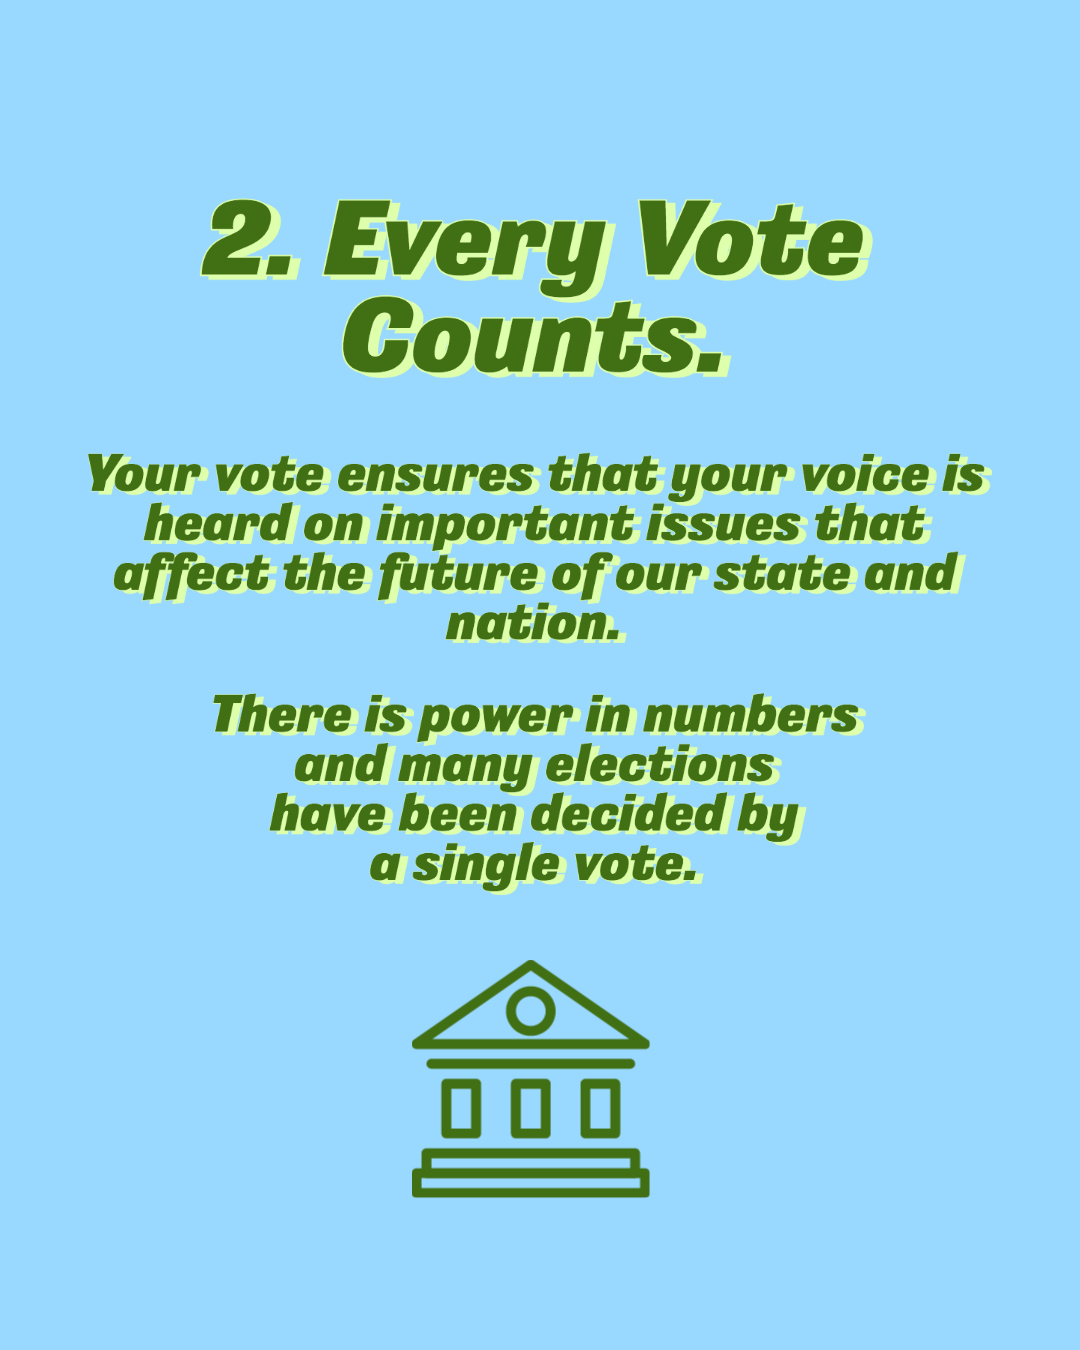 Every vote counts. Your vote ensures that your voice is heard on important issues that affect the future of our state and nation. There is power in numbers and many elections have been decided by a single vote.